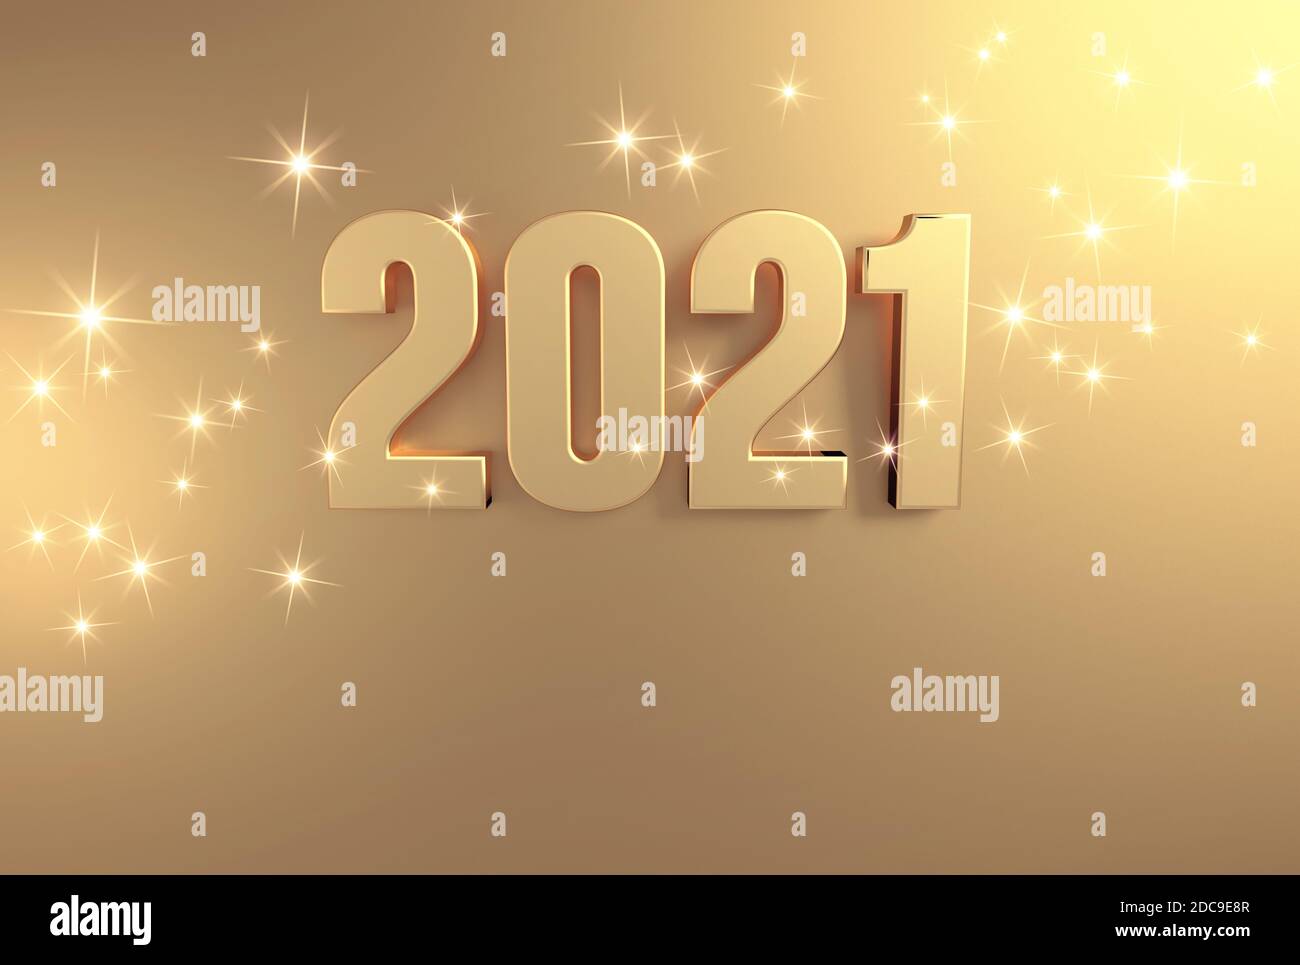 New year date 2021 colored in gold, on a festive golden background - 3D illustration Stock Photo